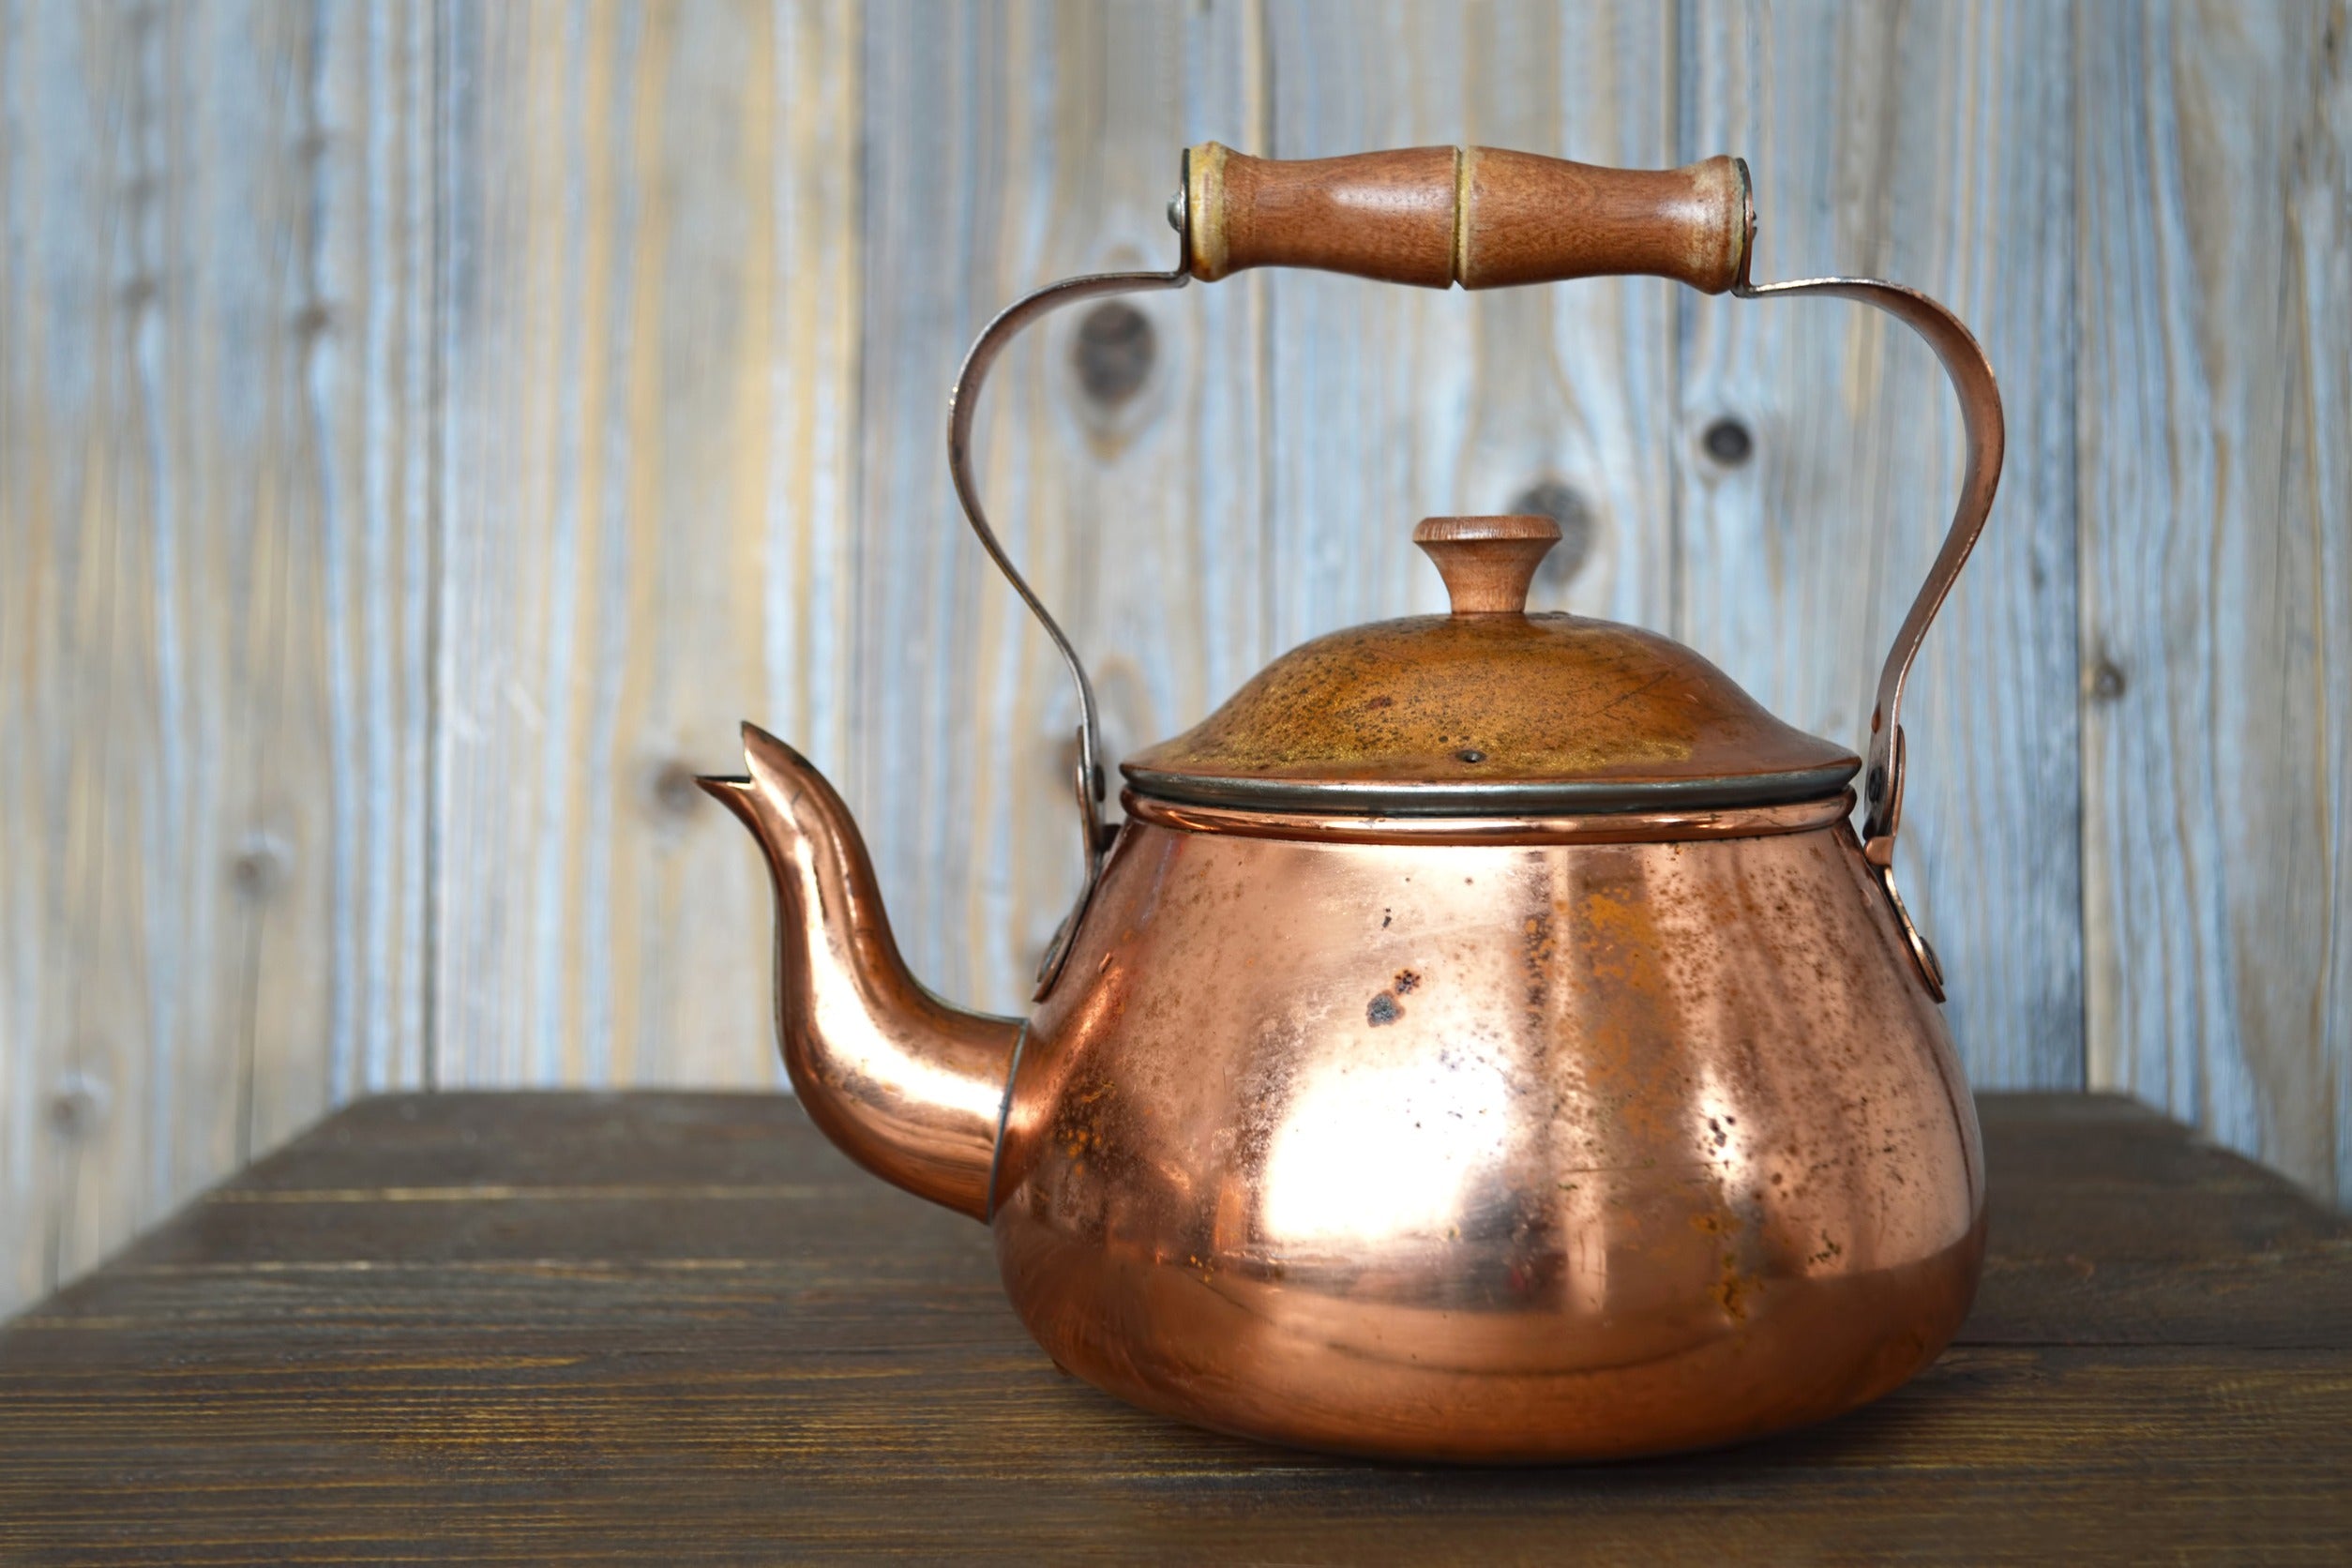 How to Clean a Copper Tea Kettle? - Sparkle & Shine Tips